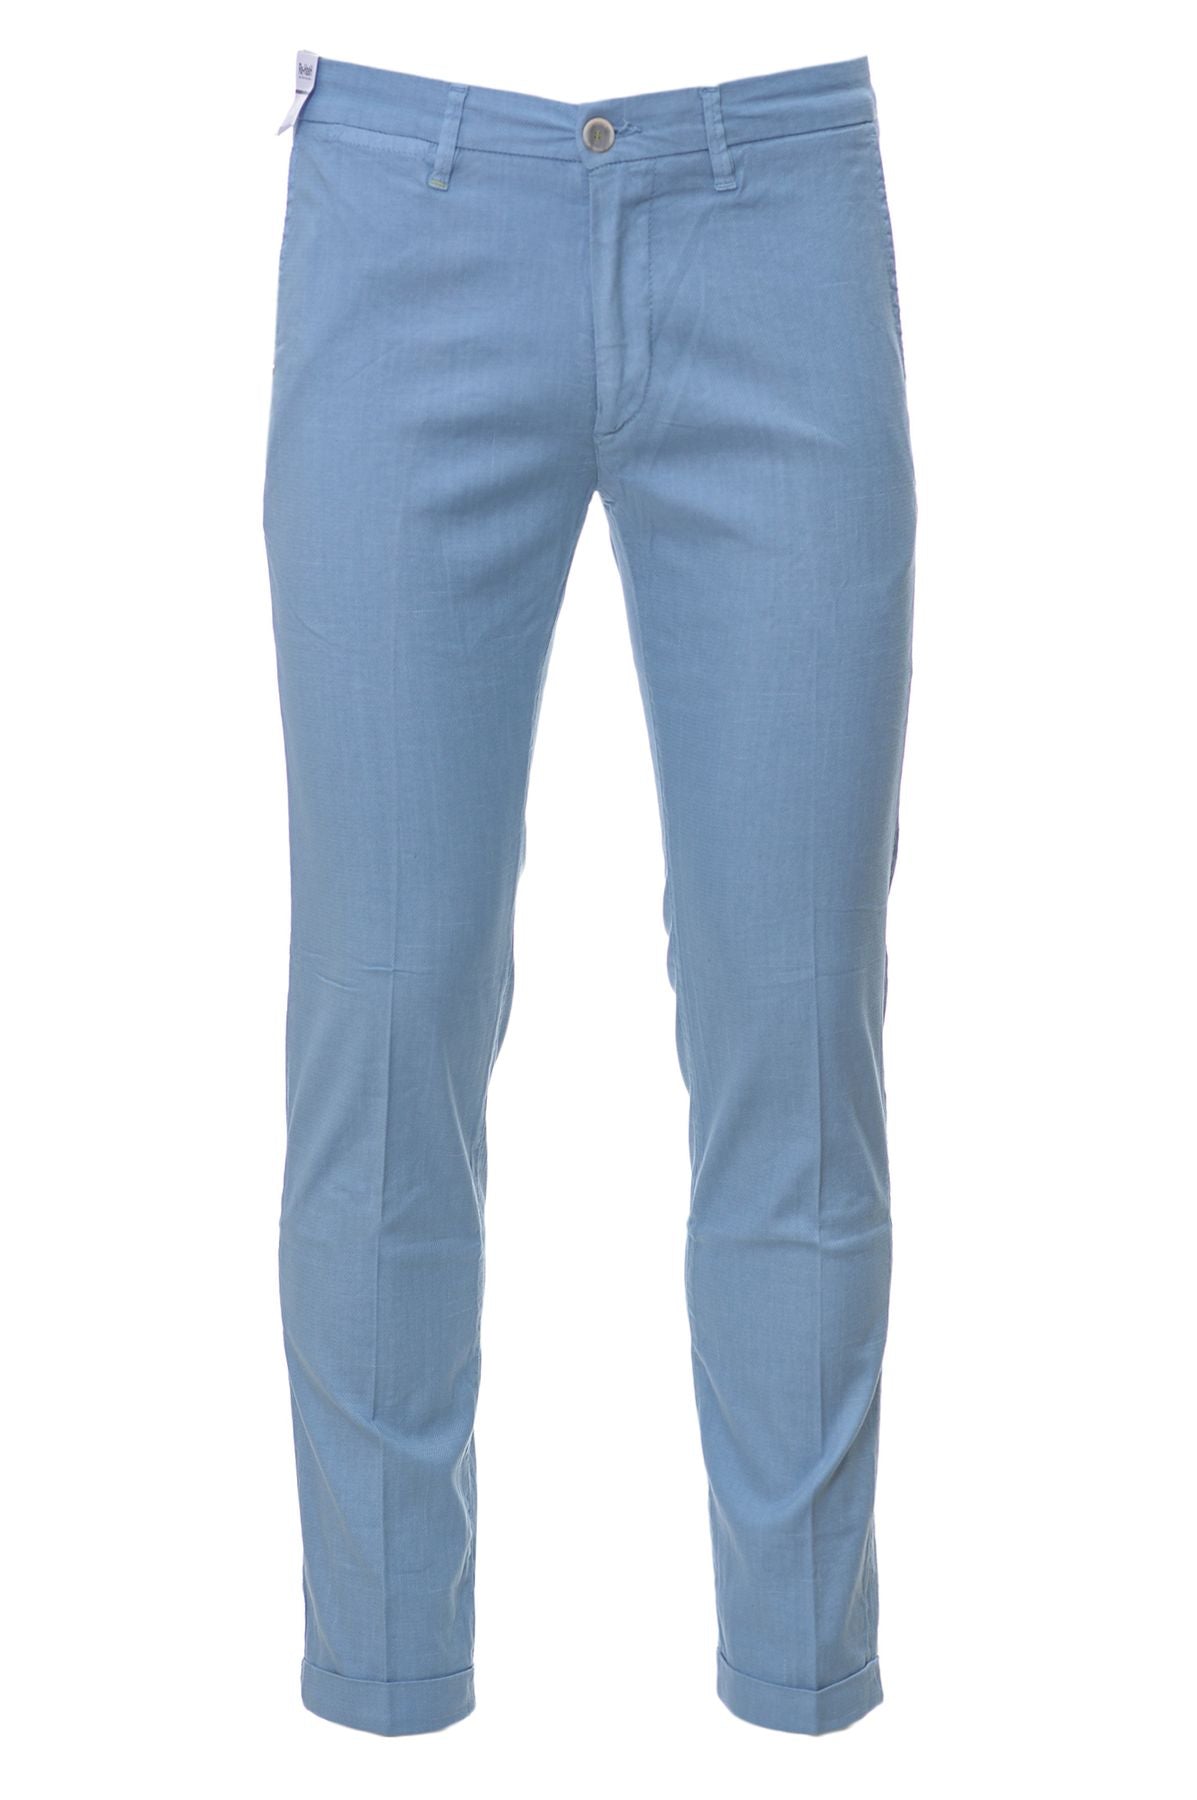 Re-HasH Spring/Summer Cotton Trousers